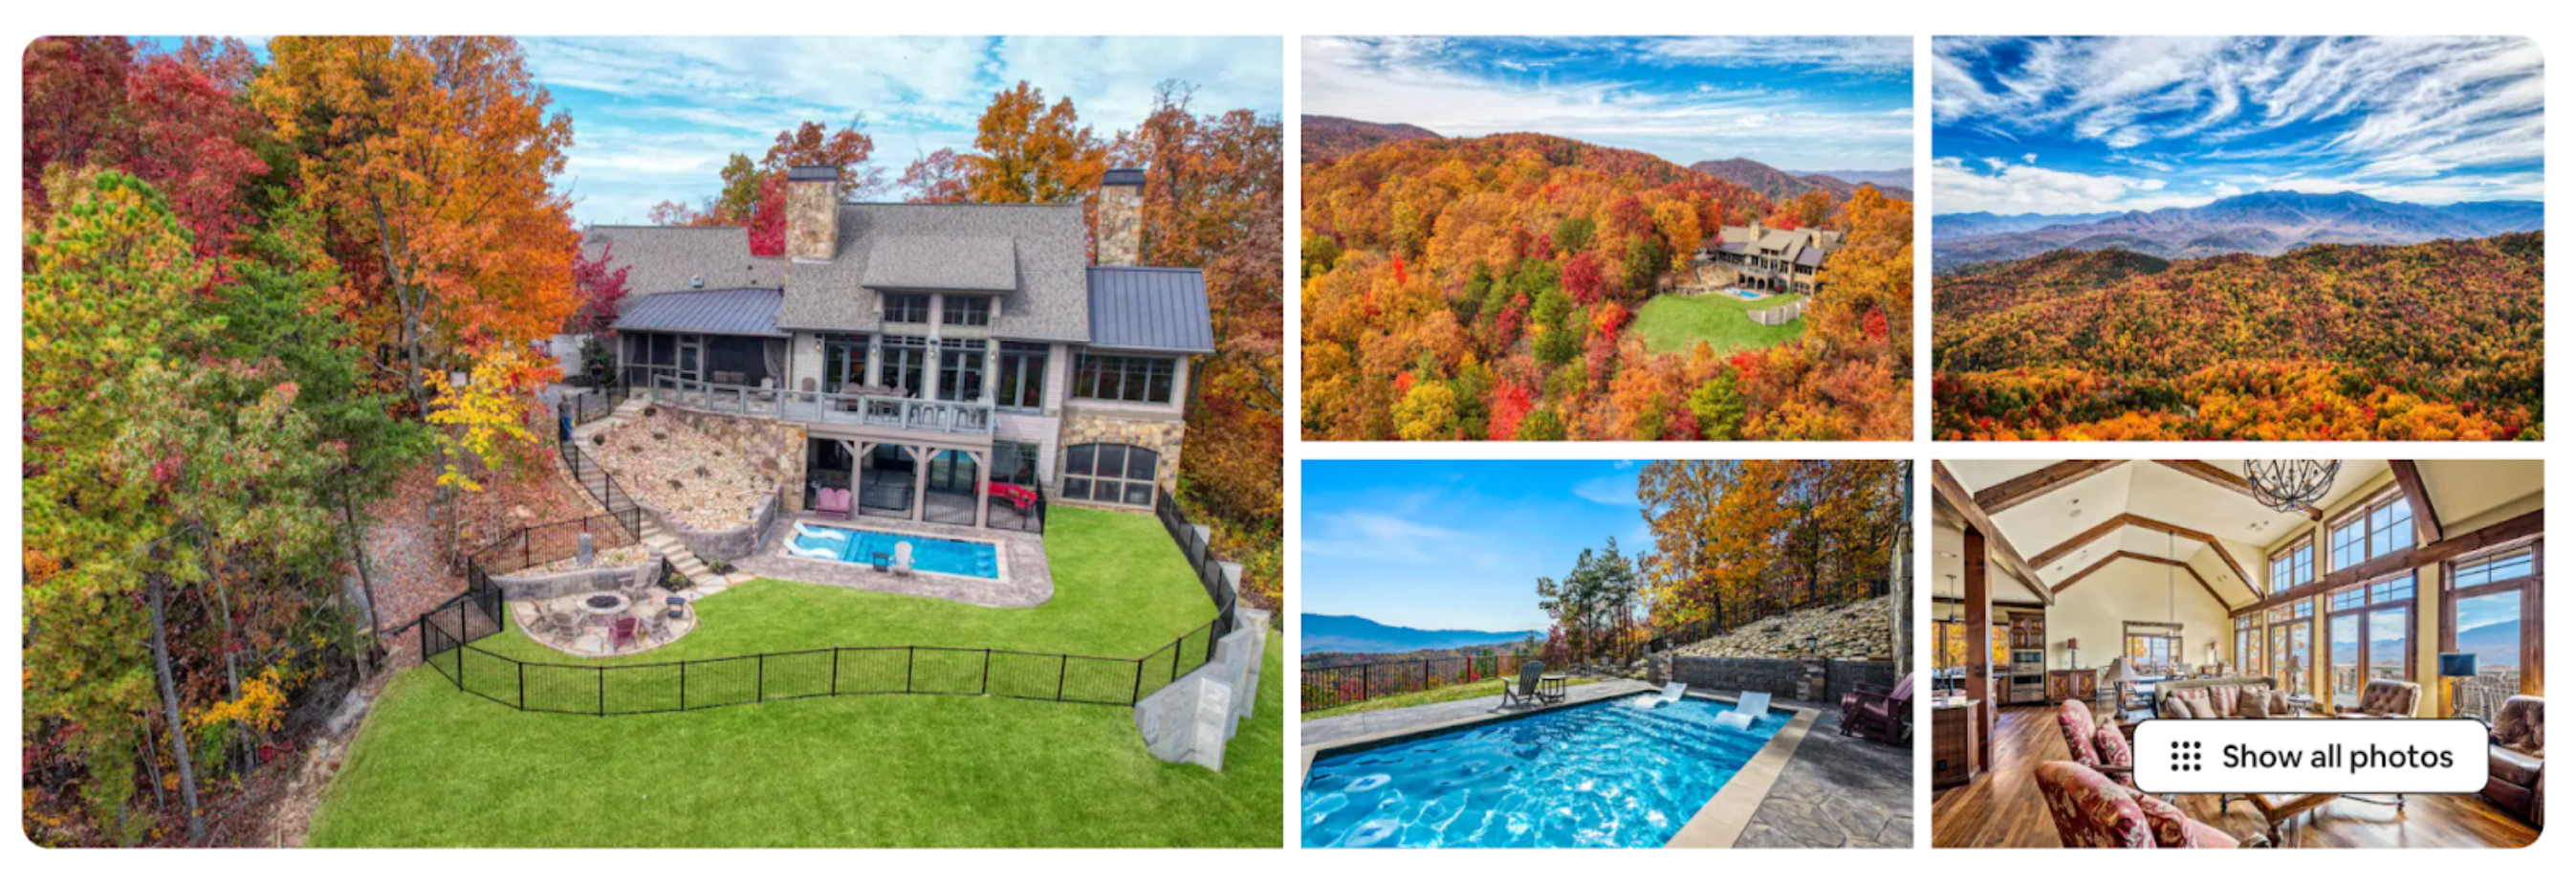 fall colors abound in this Smoky Mountain luxury rental